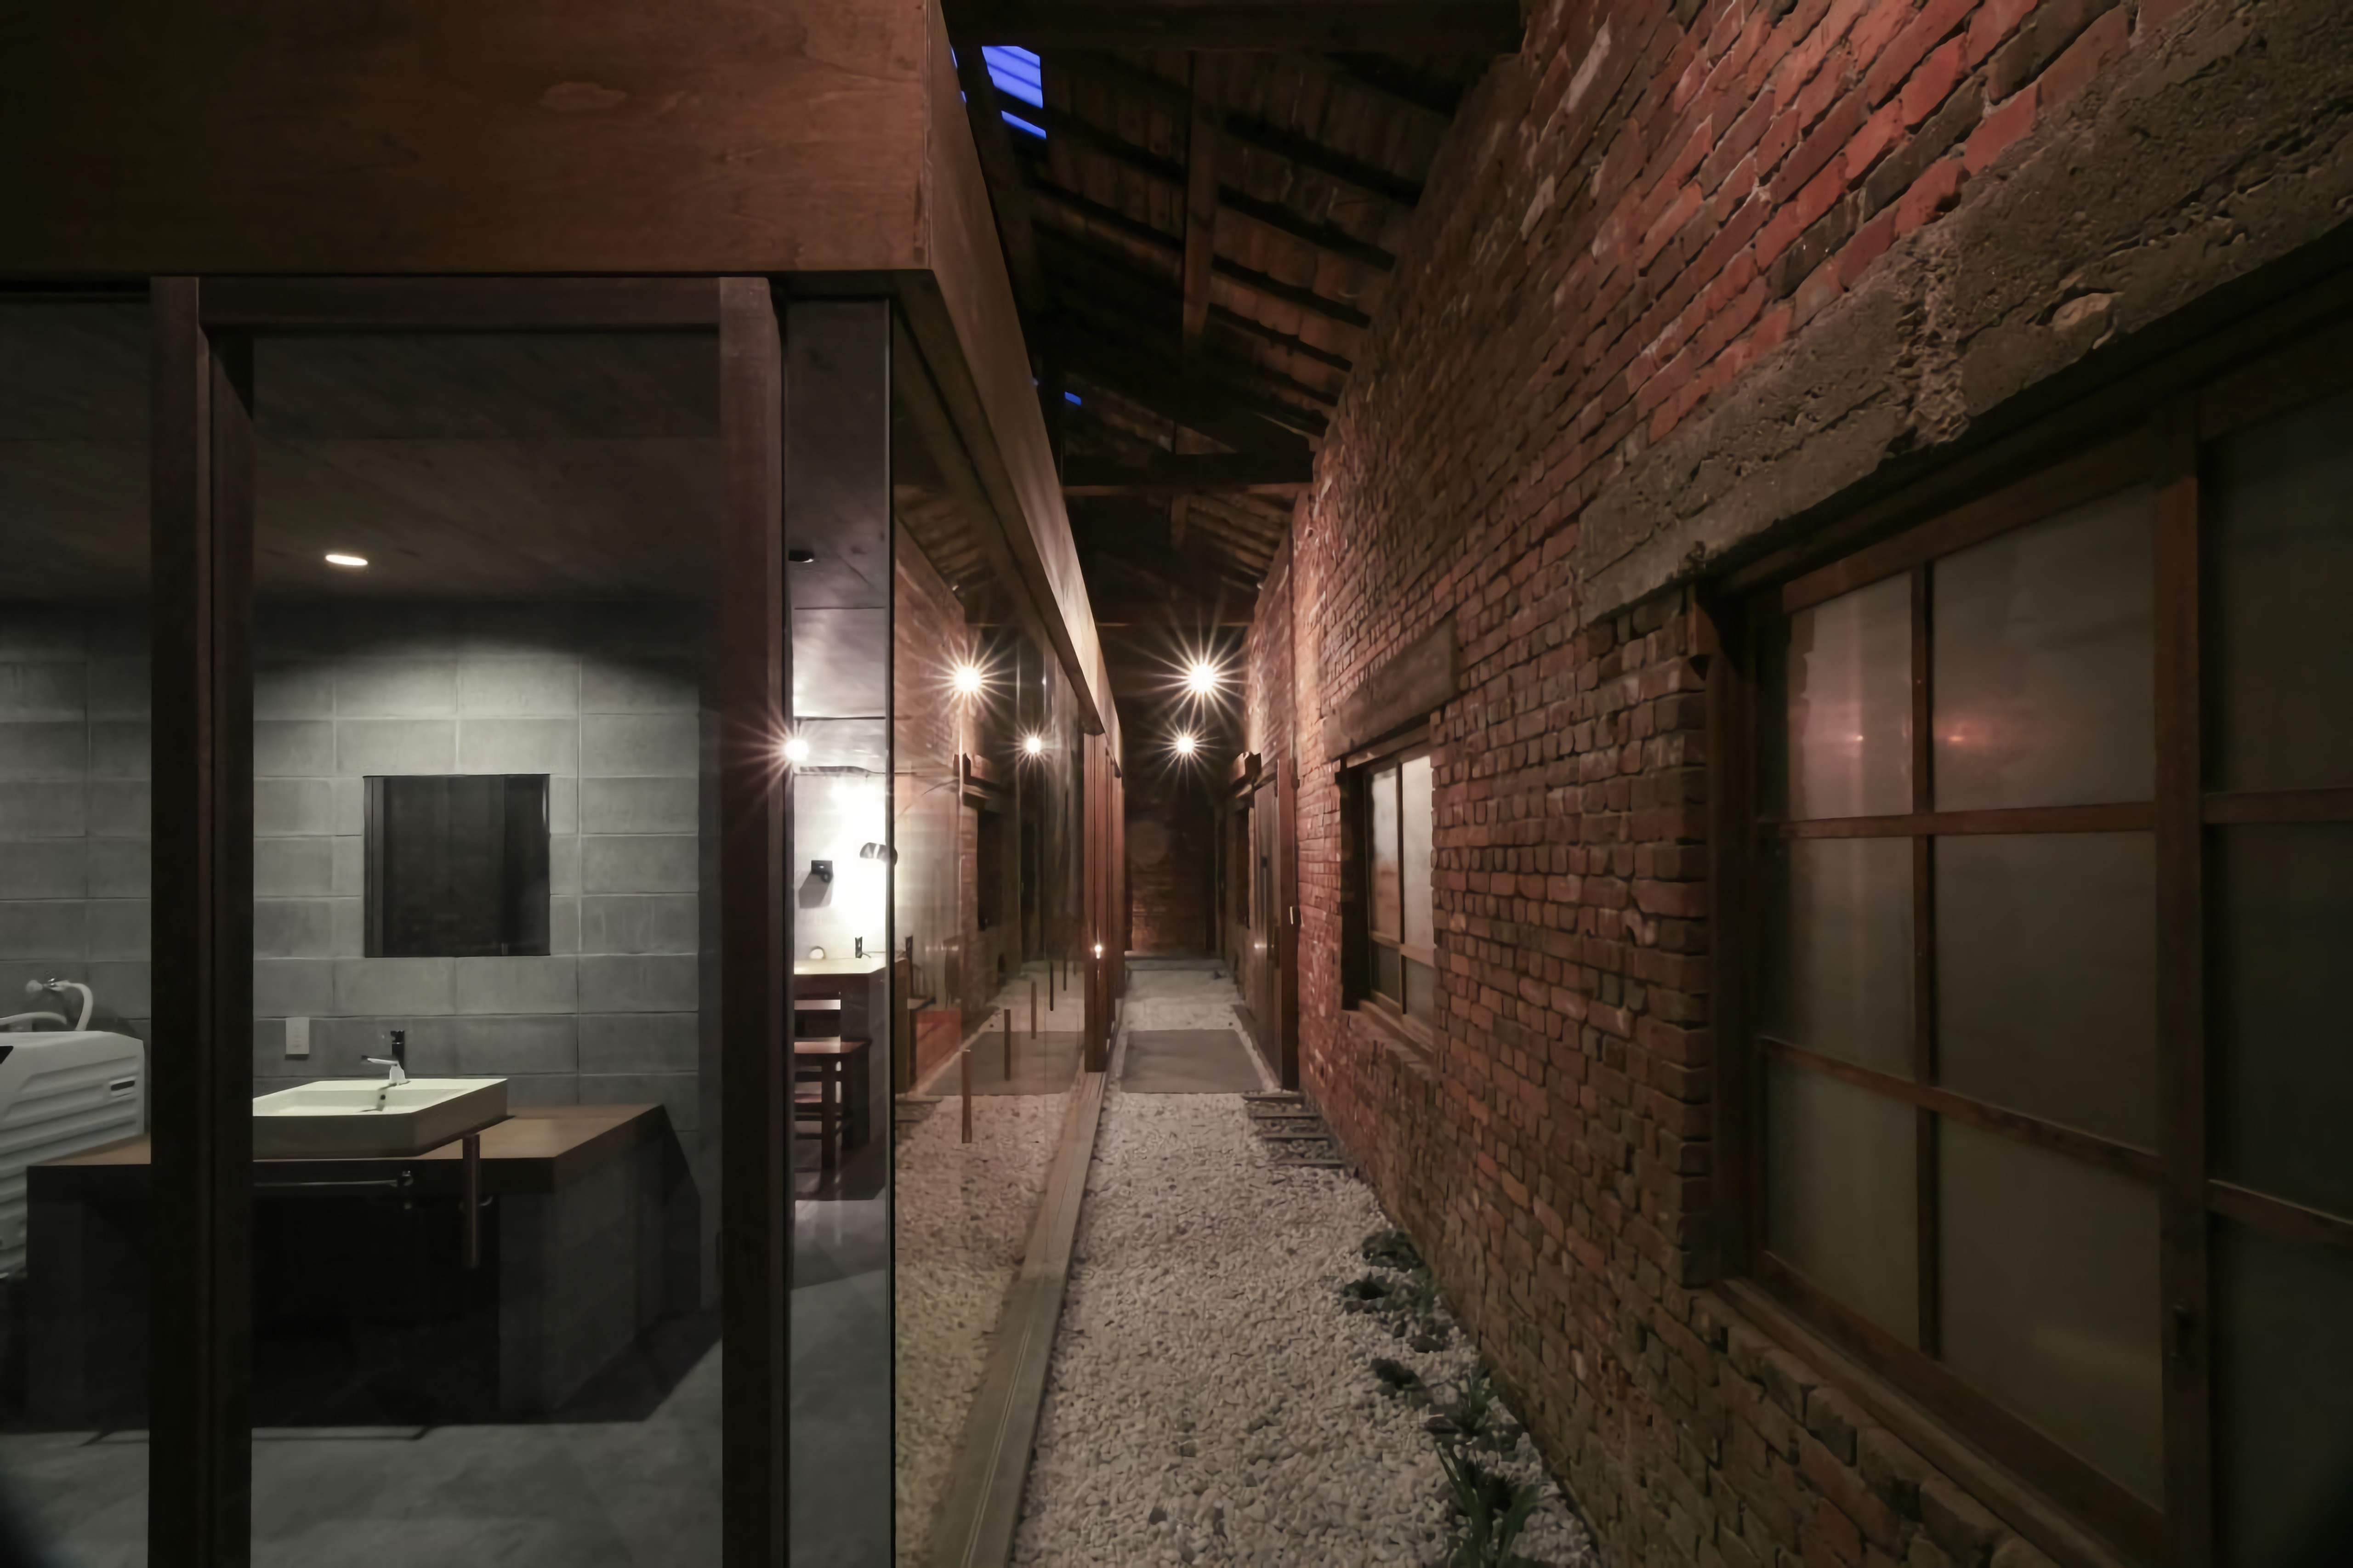 The Charm of an Old Warehouse Side by Side with a Modern New Volume